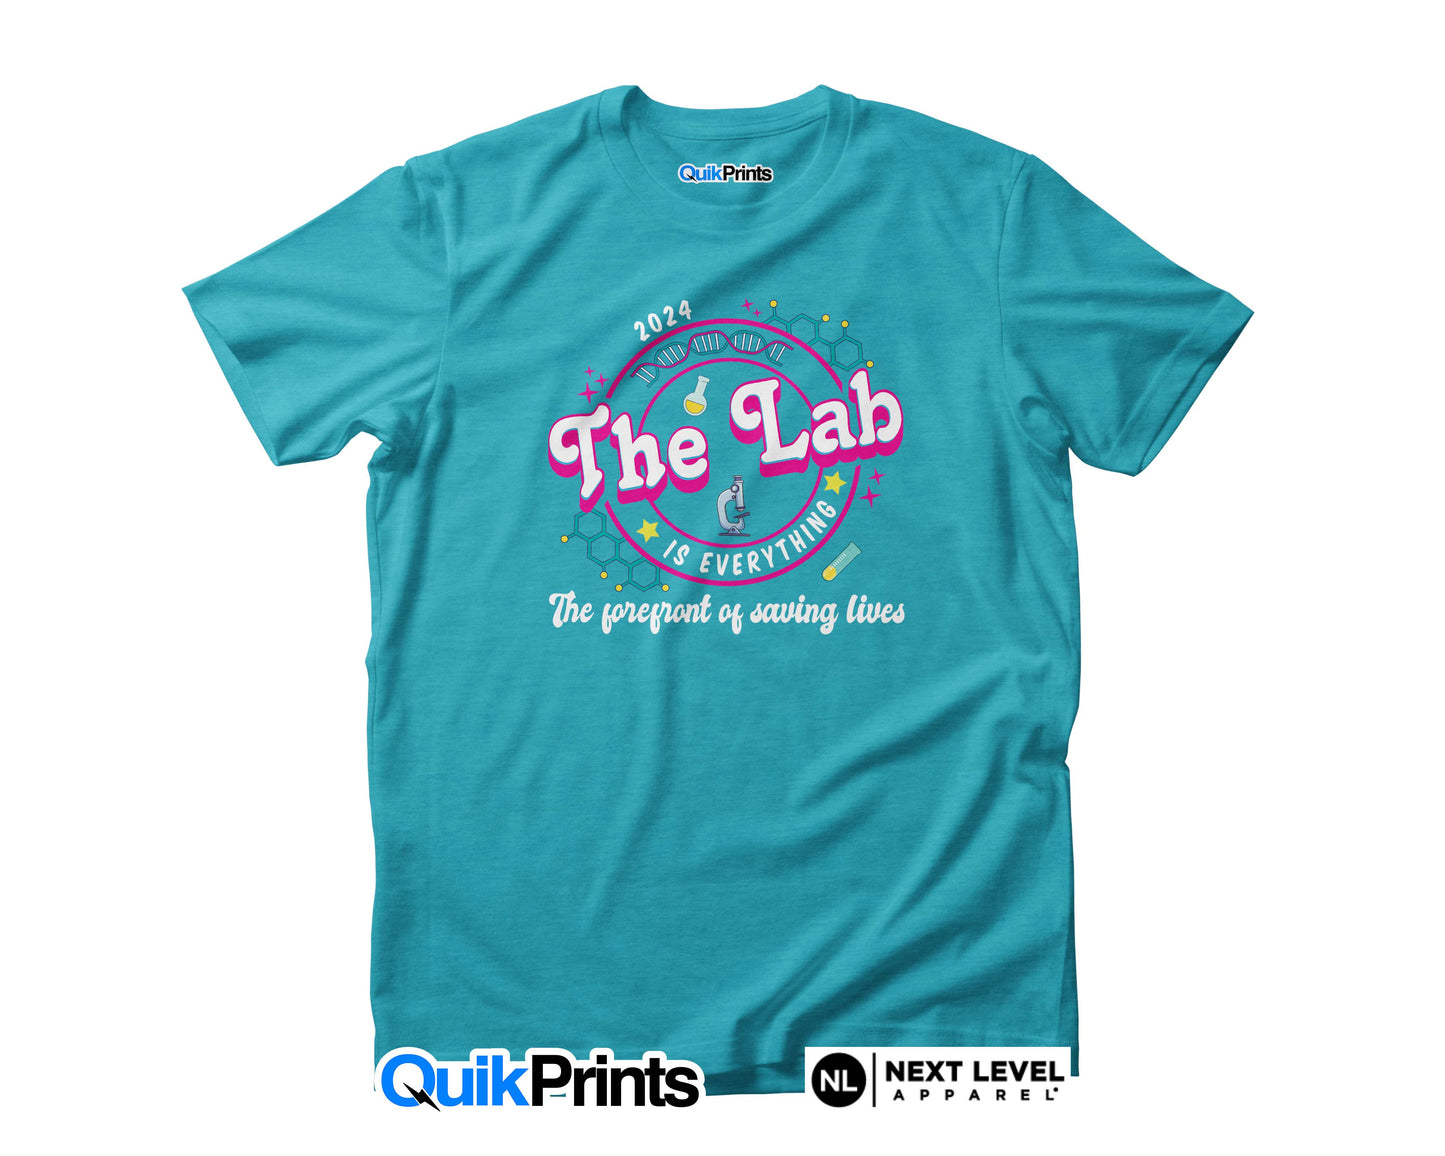 The Lab - The Forefront of Saving Lives